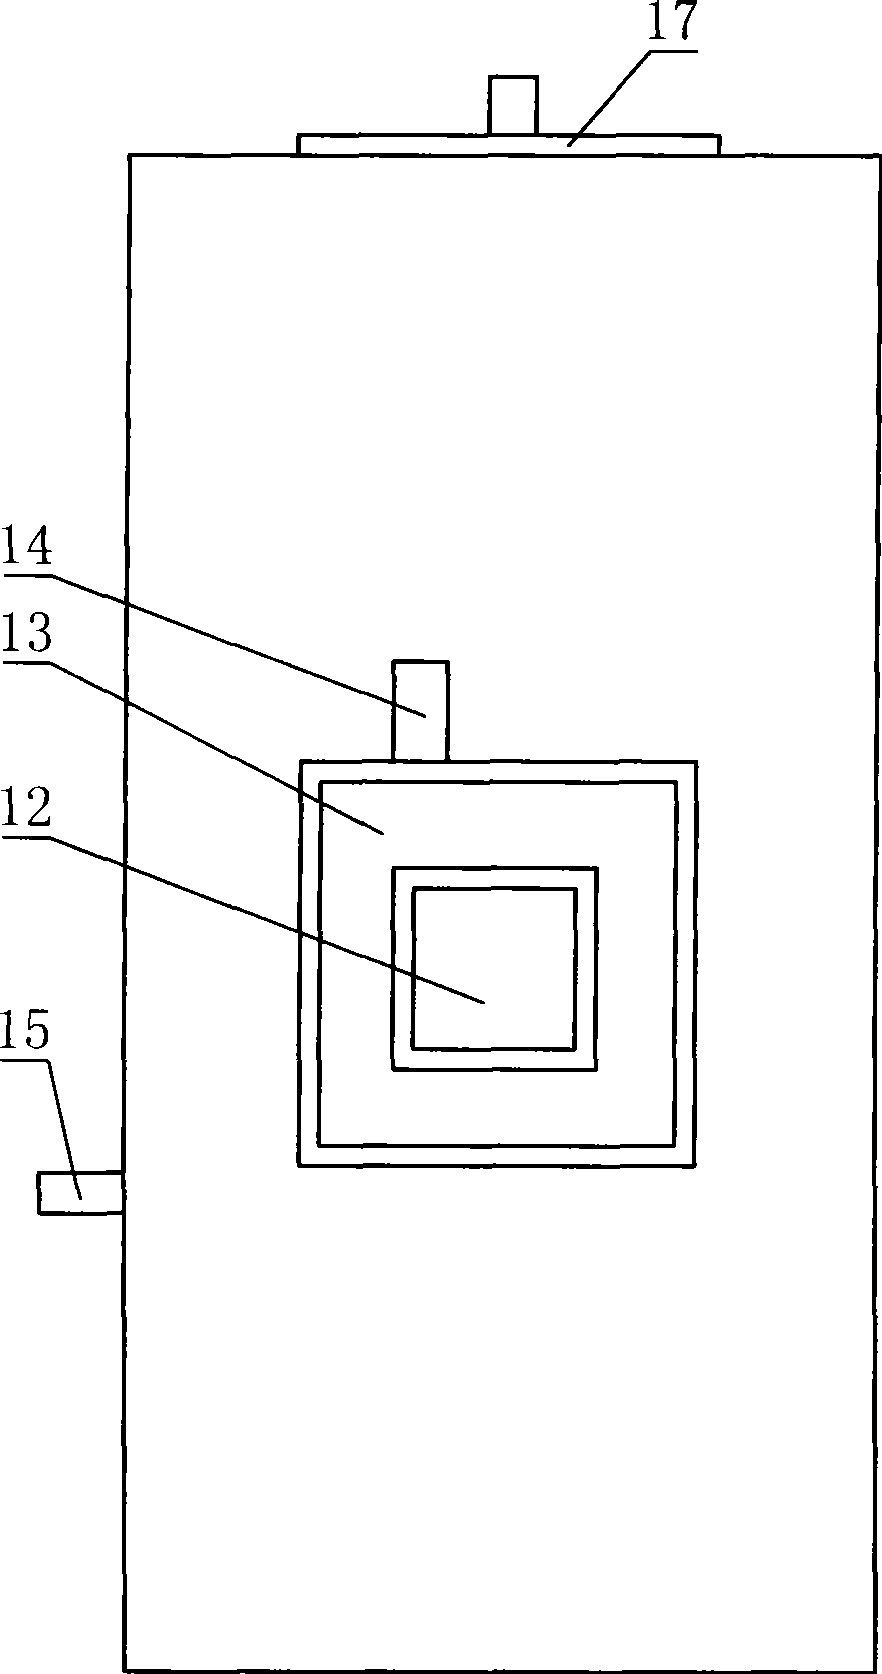 Direct combustion furnace